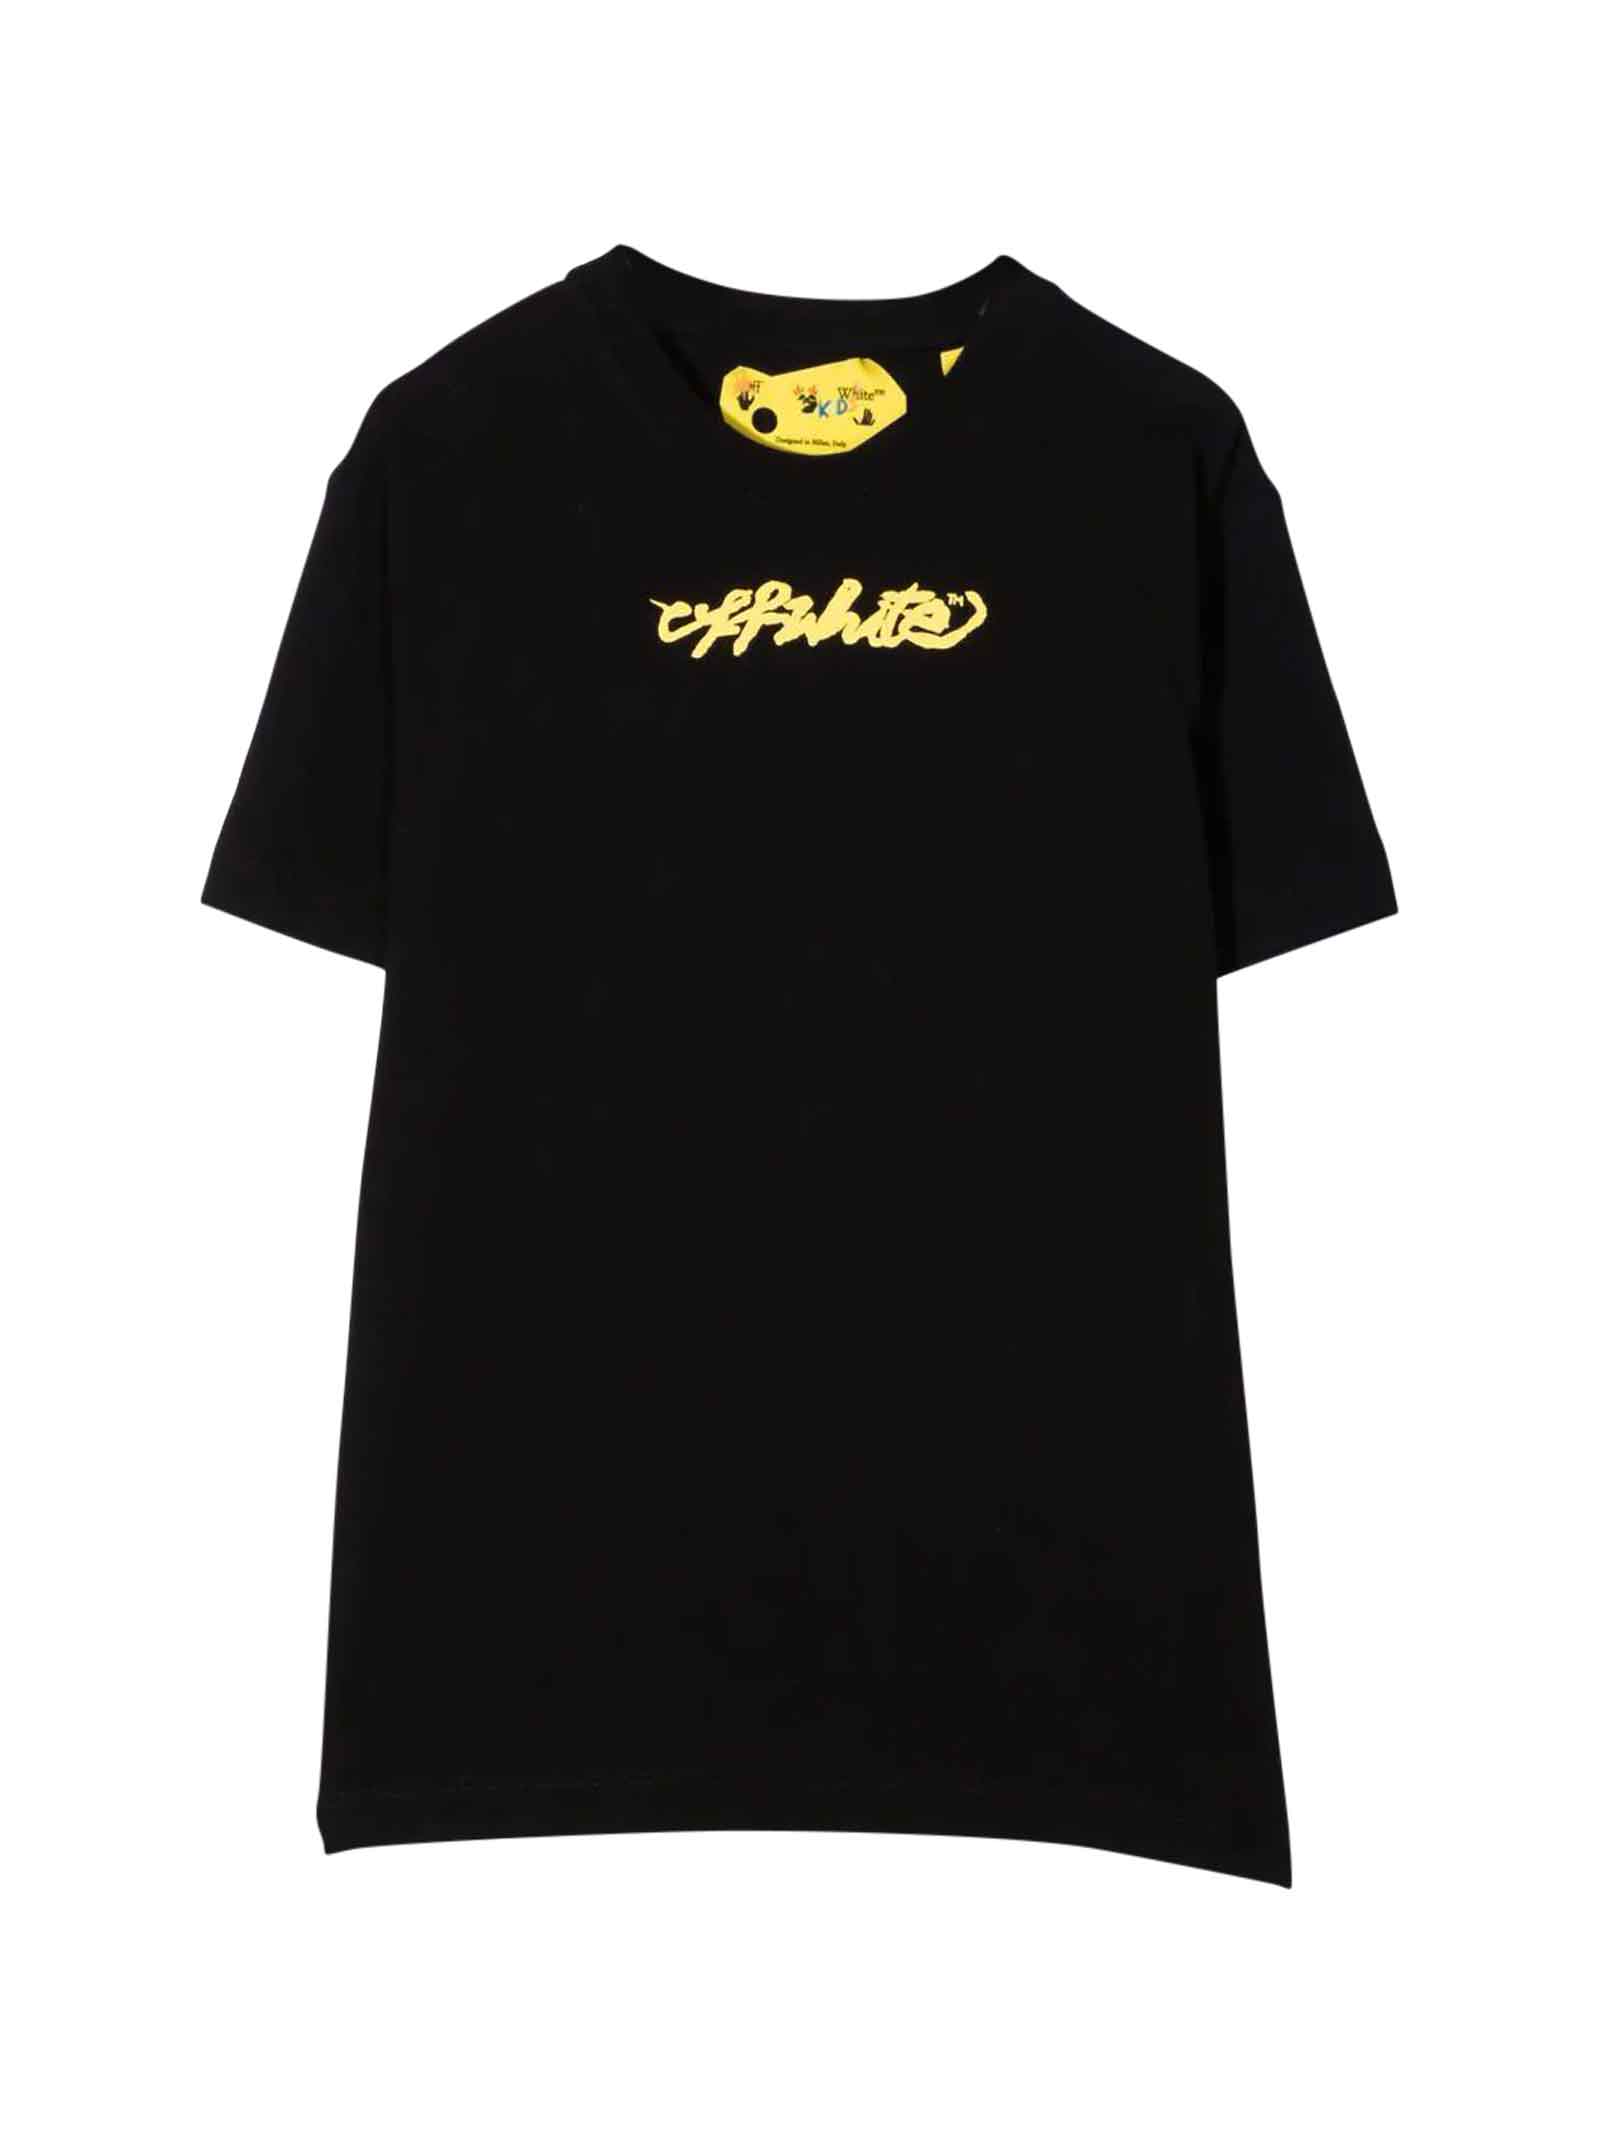 Off-White Black T-shirt With Yellow Print